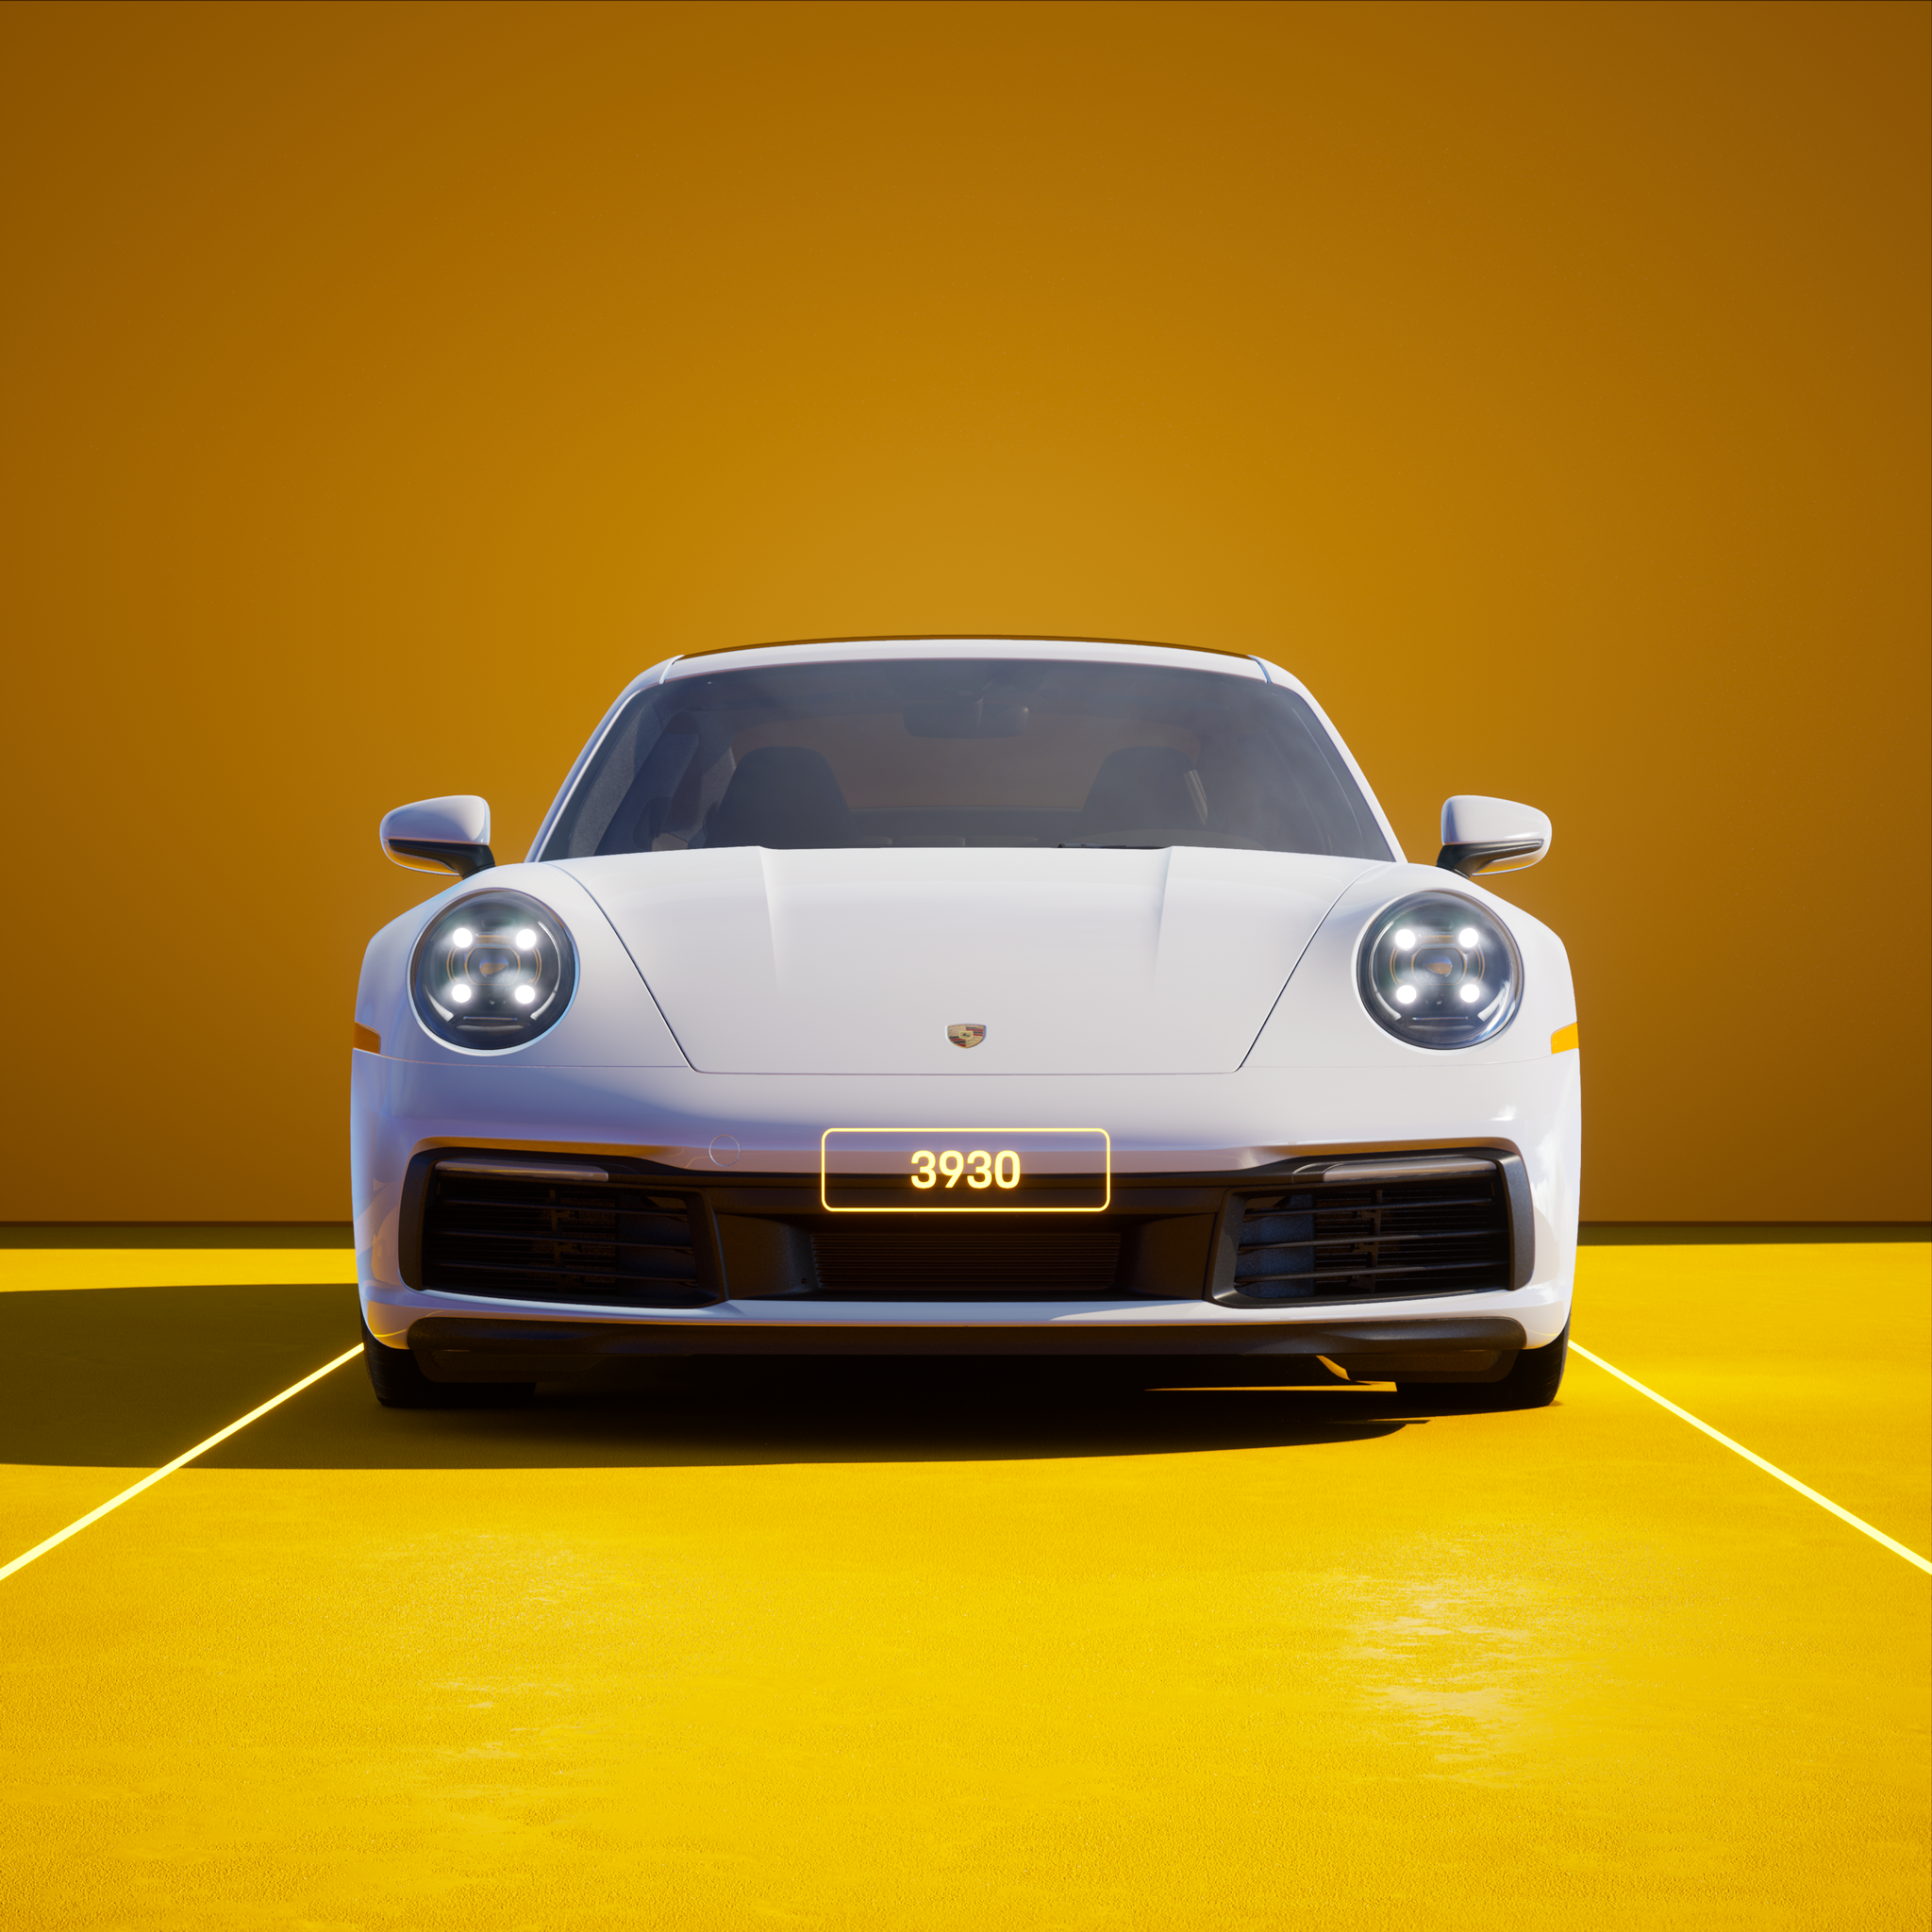 The PORSCHΞ 911 3930 image in phase